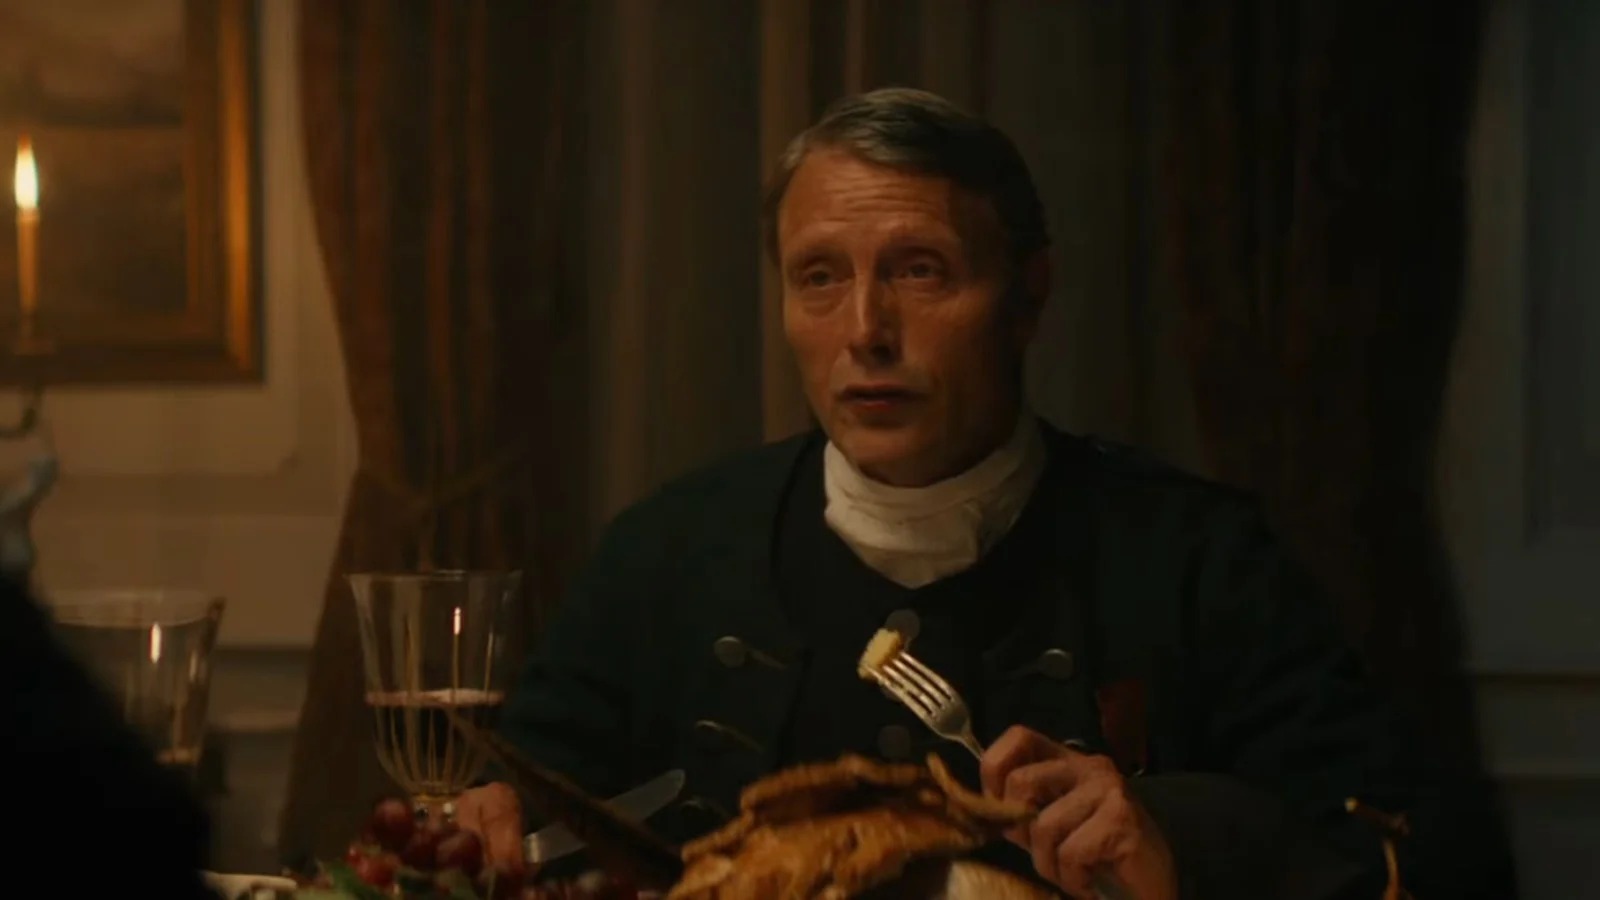 mads mikkelsen in The Promised Land